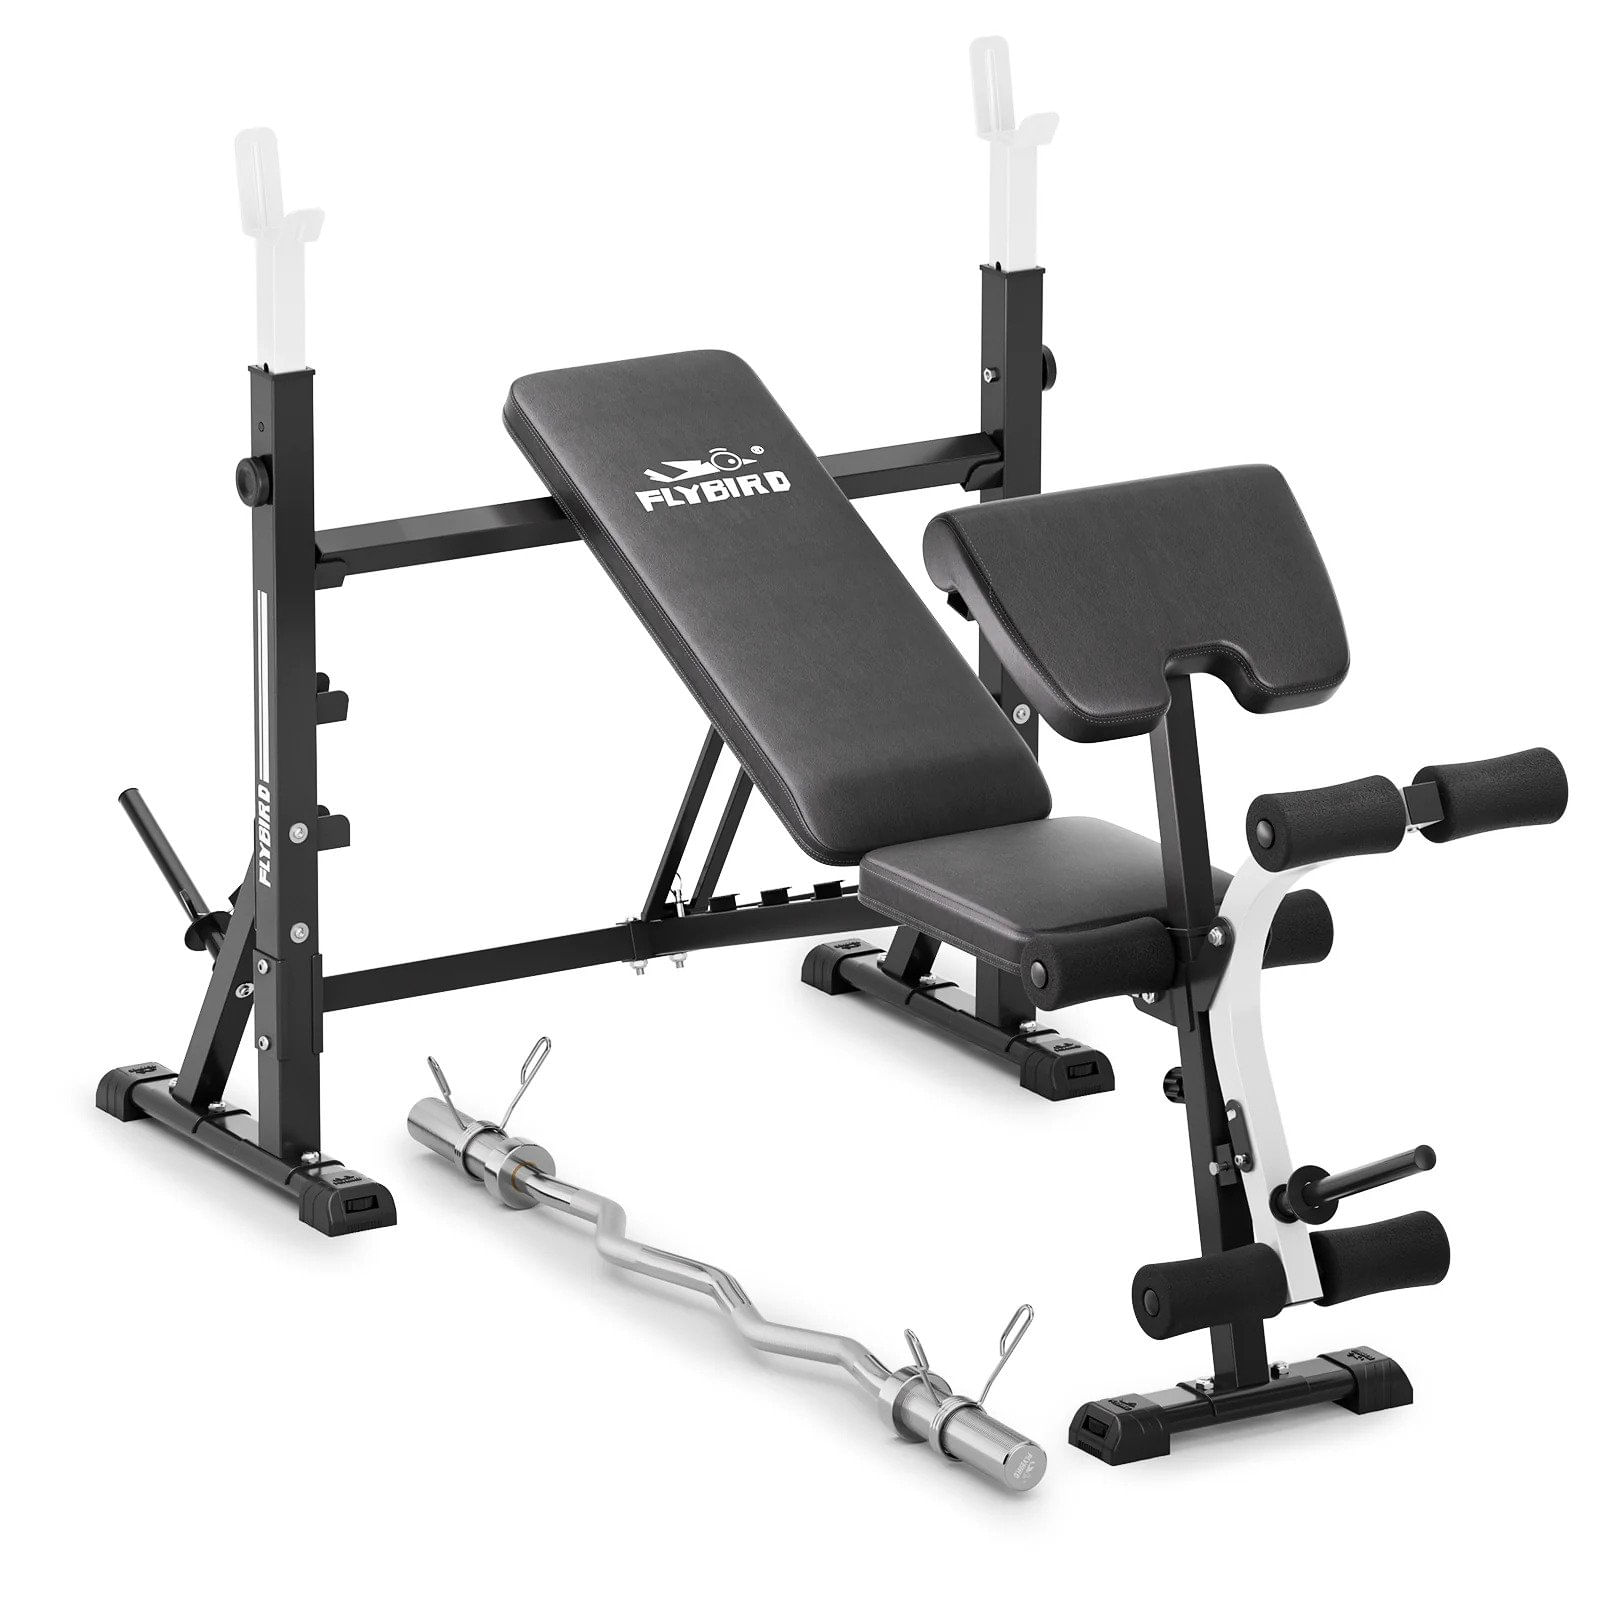 Bundle: Flybird Curl Bar + Olympic Weight Bench